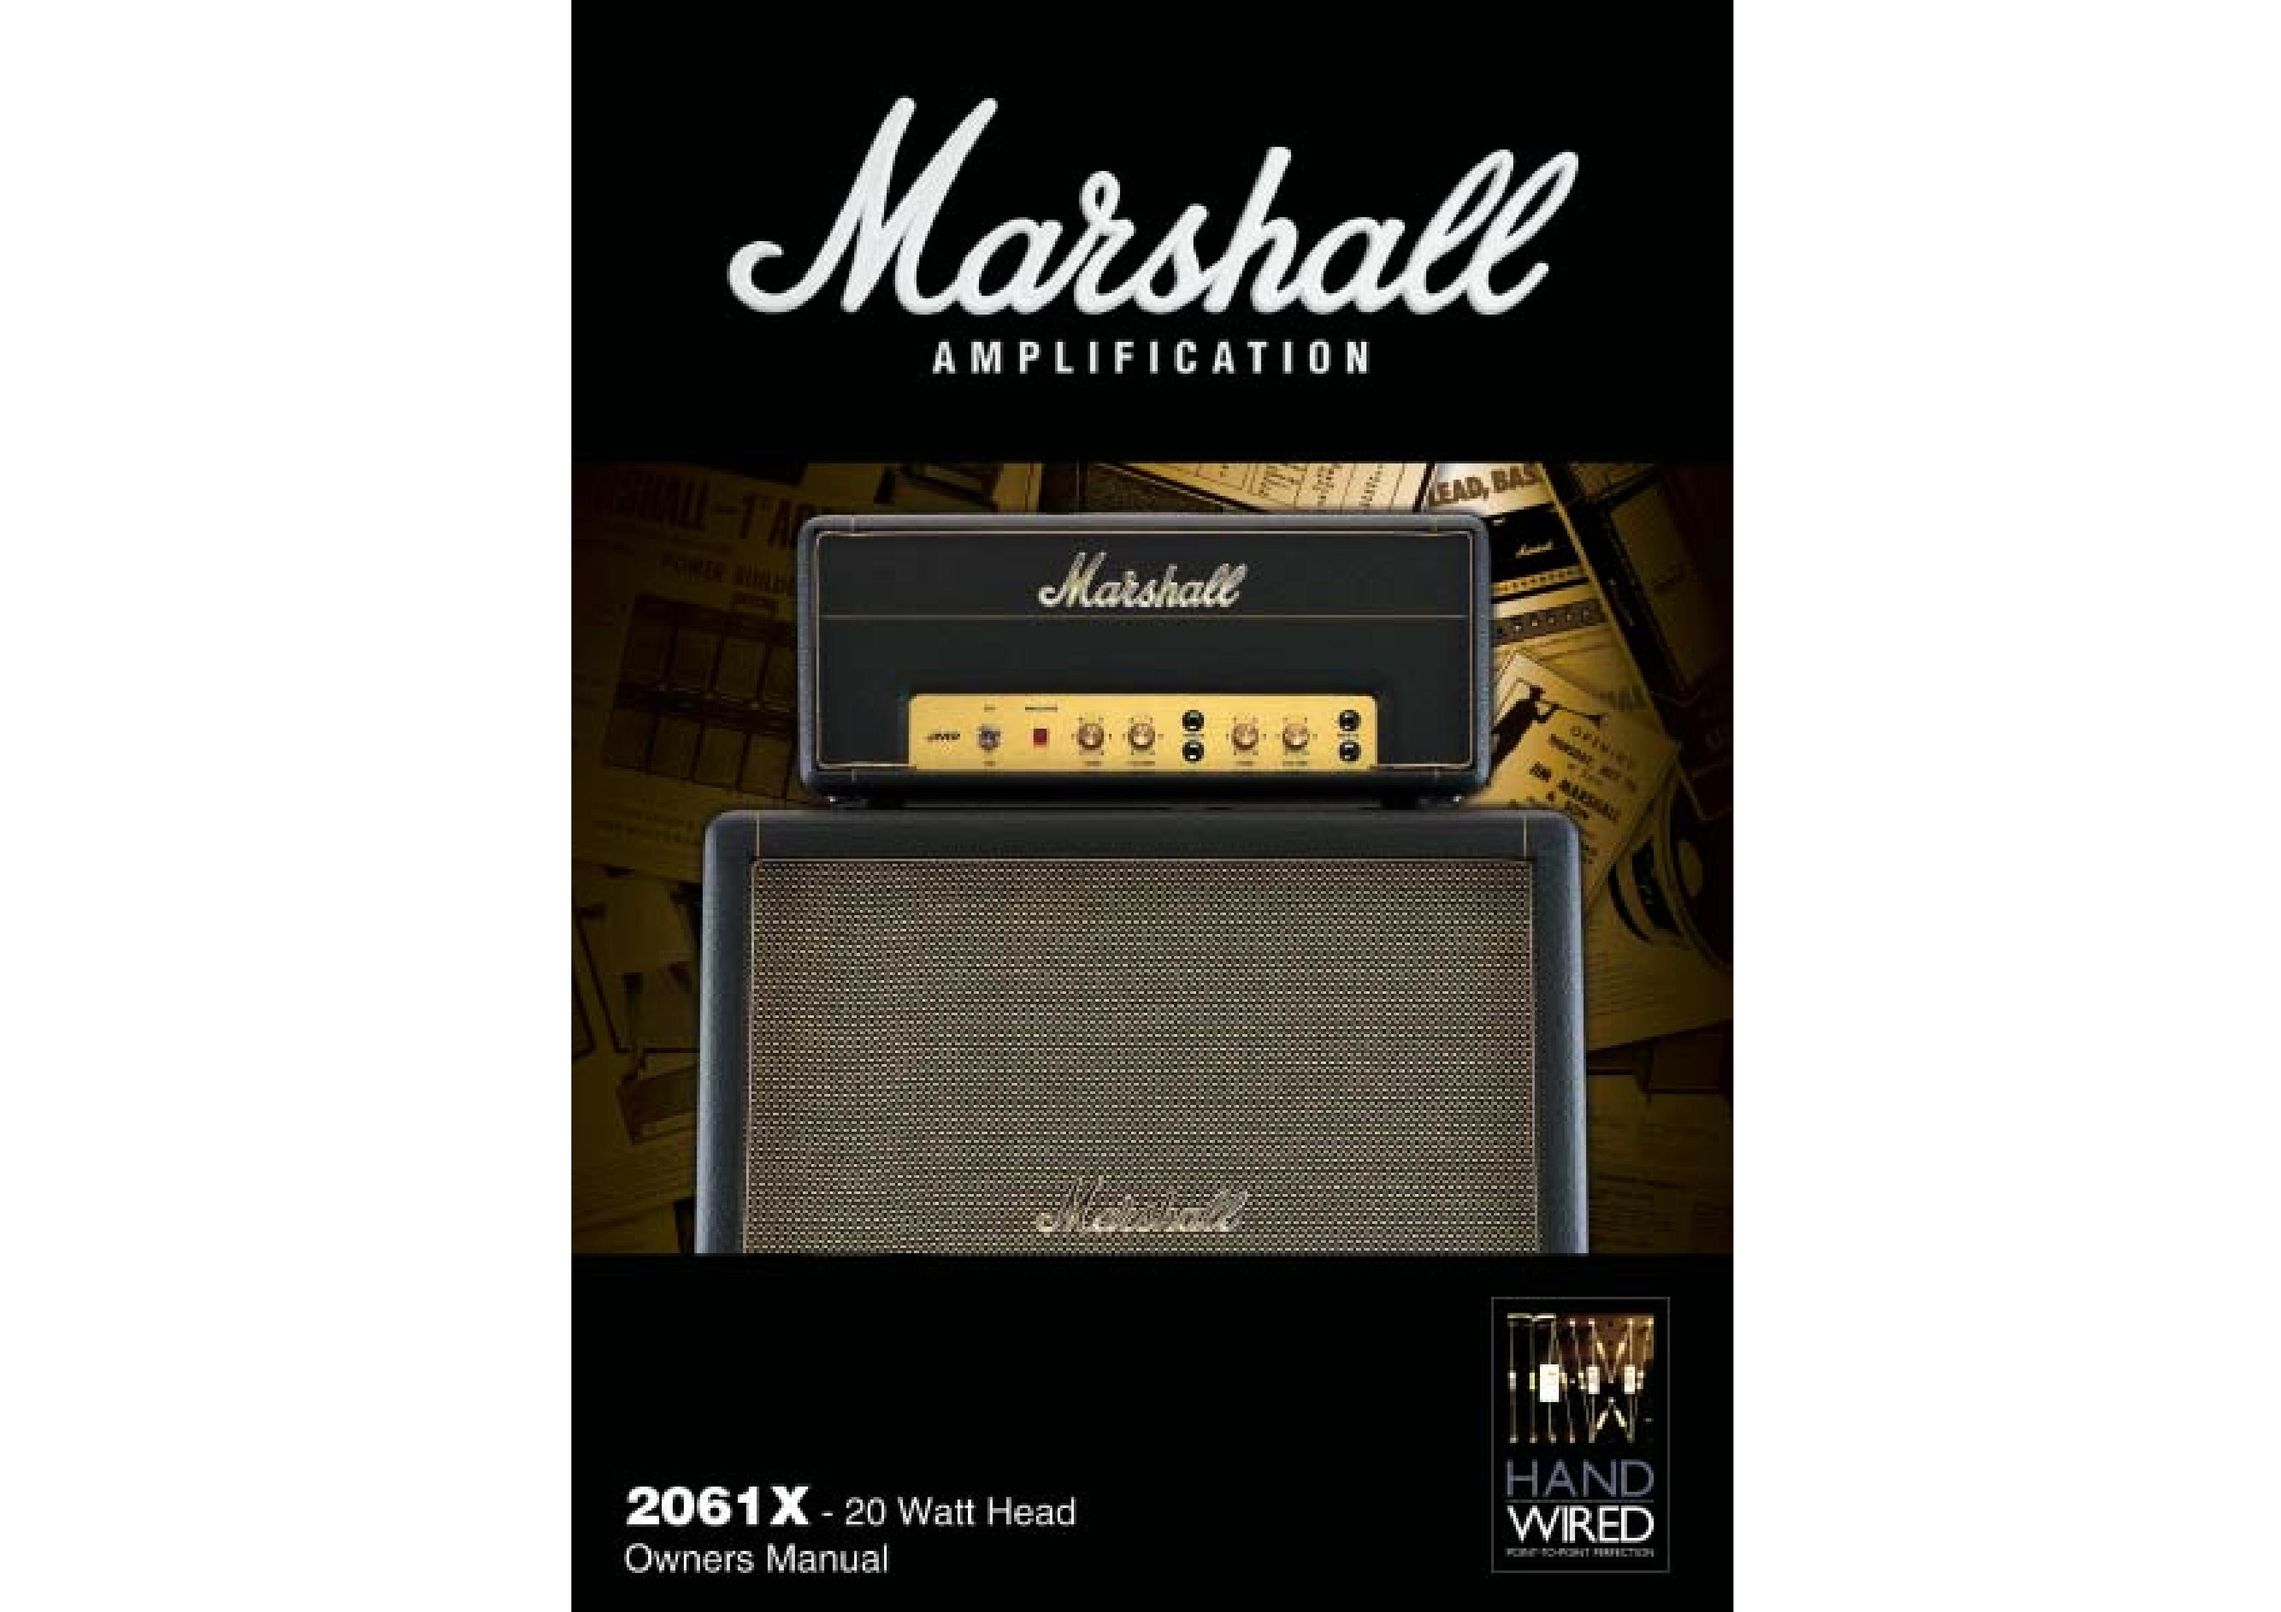 Marshall Amplification 2061X Stereo Amplifier User Manual